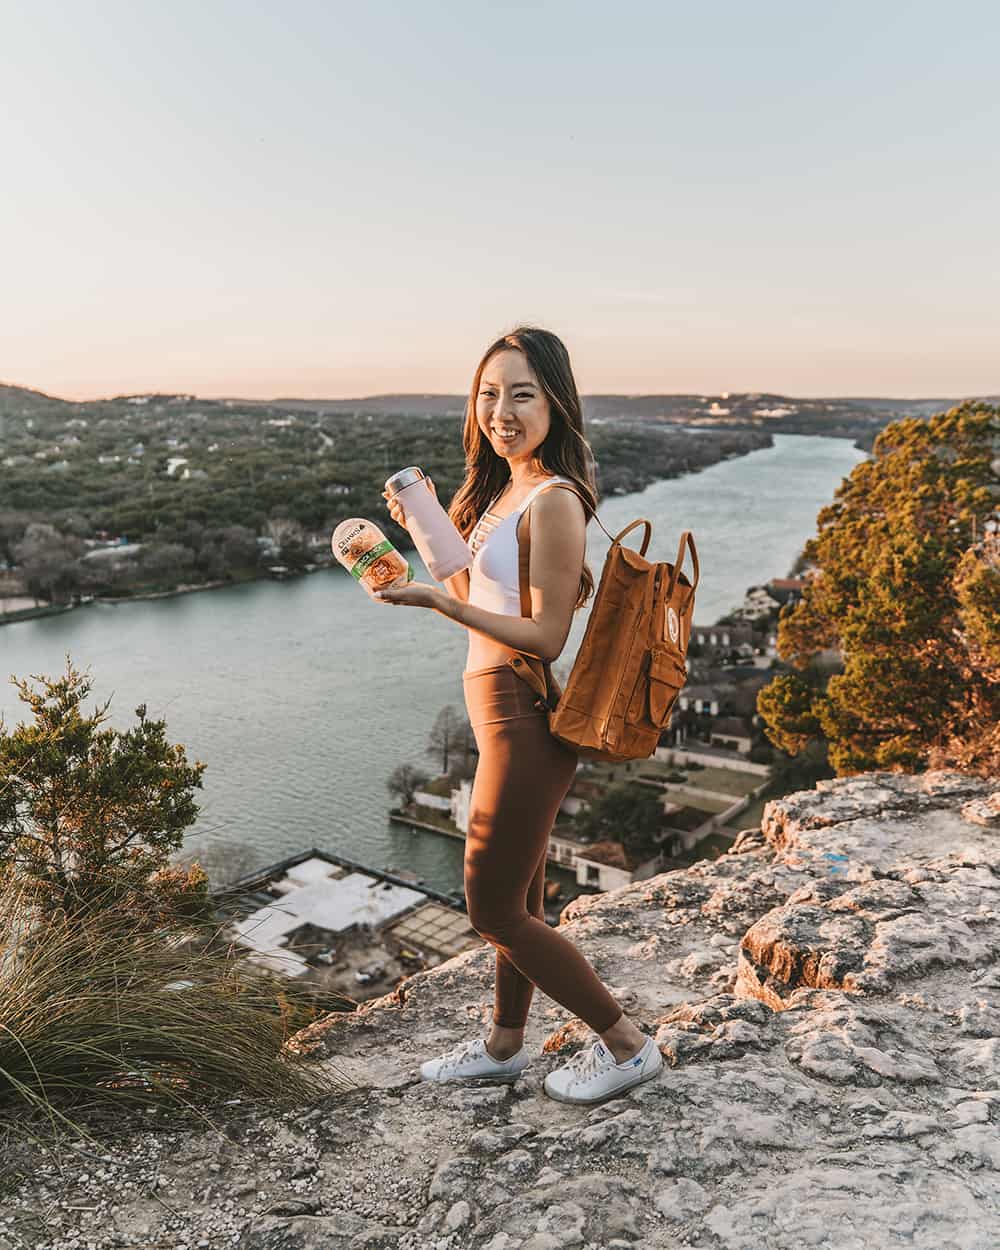 one of the things to do in Austin is to climb Mount Bonnell